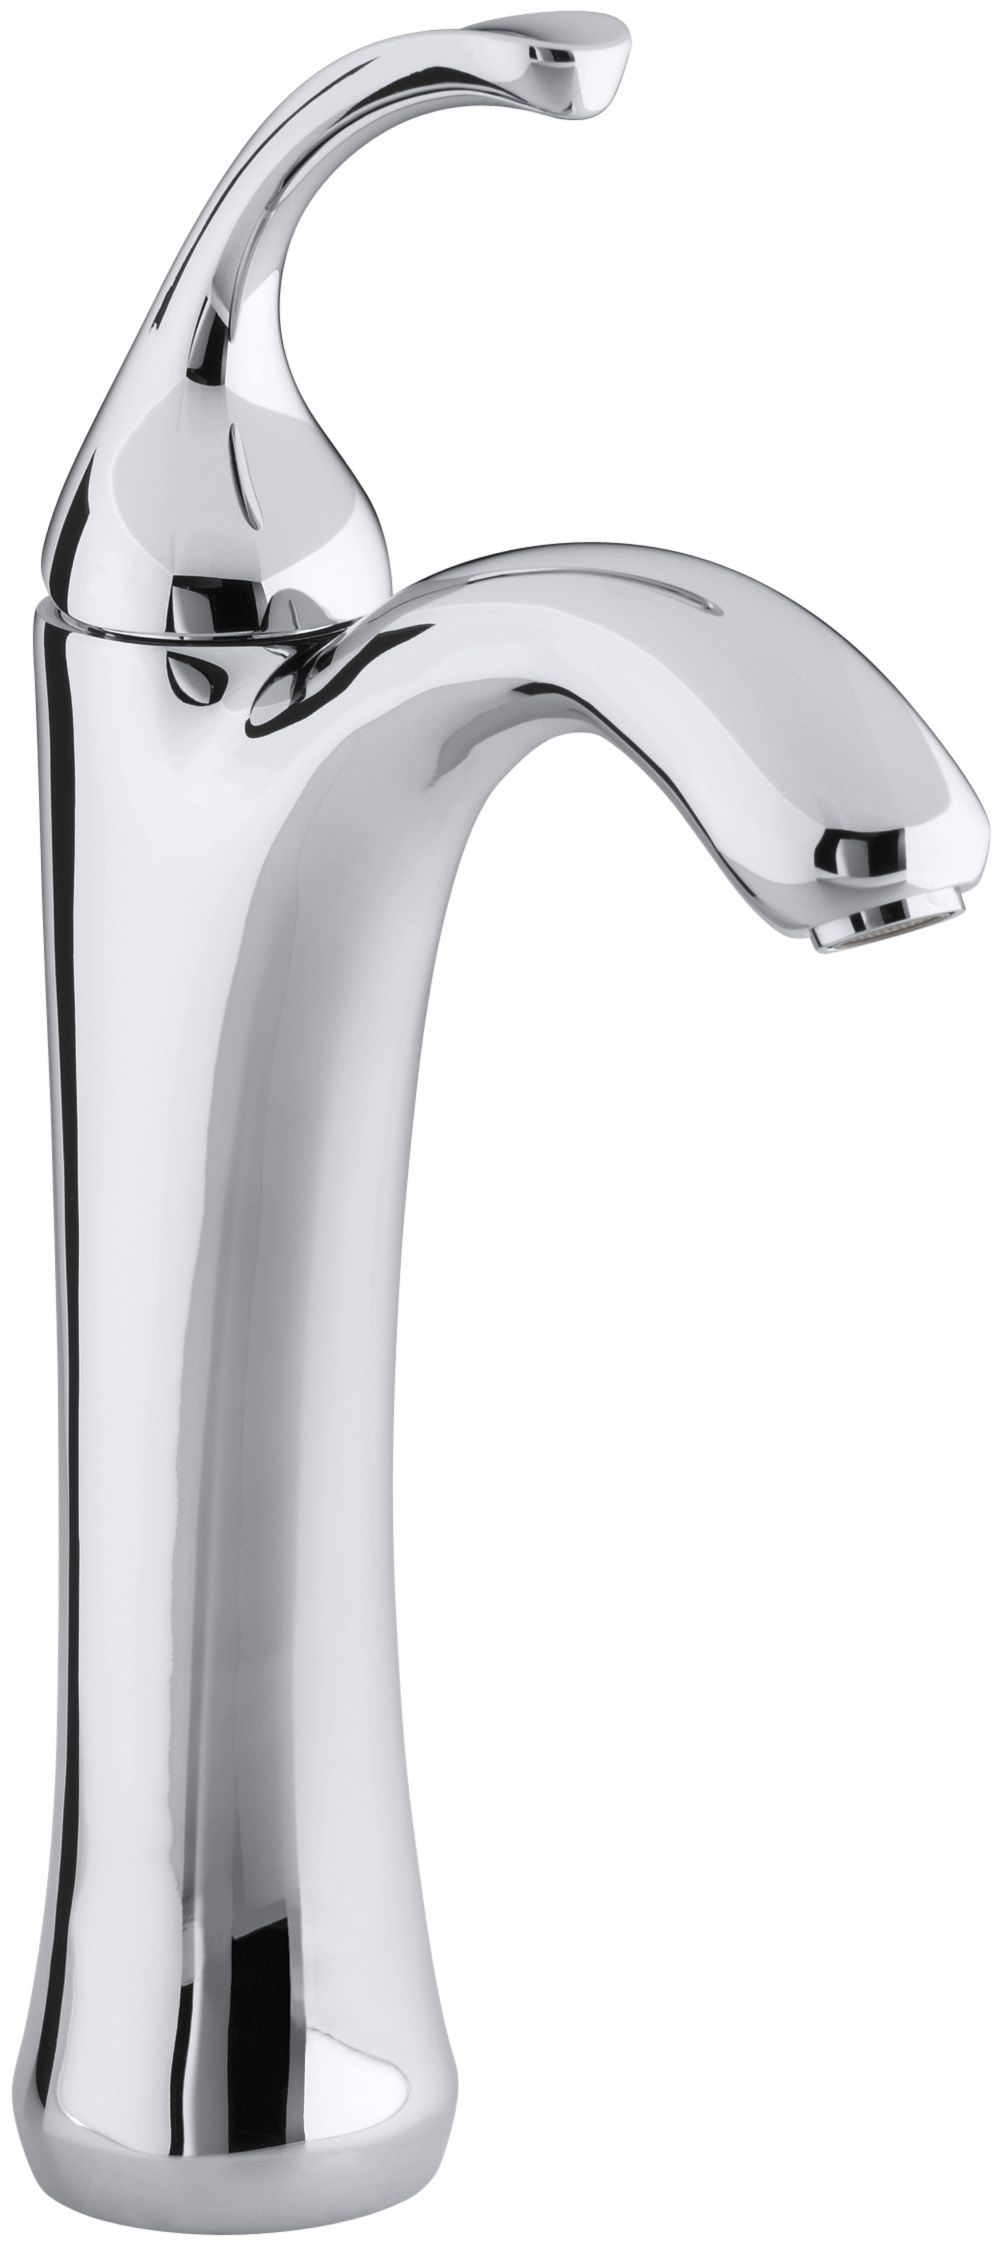 Kohler K-10217-4-CP Polished Chrome Forte Single Hole Bathroom Faucet -  Free Metal Pop-Up Drain Assembly with purchase 